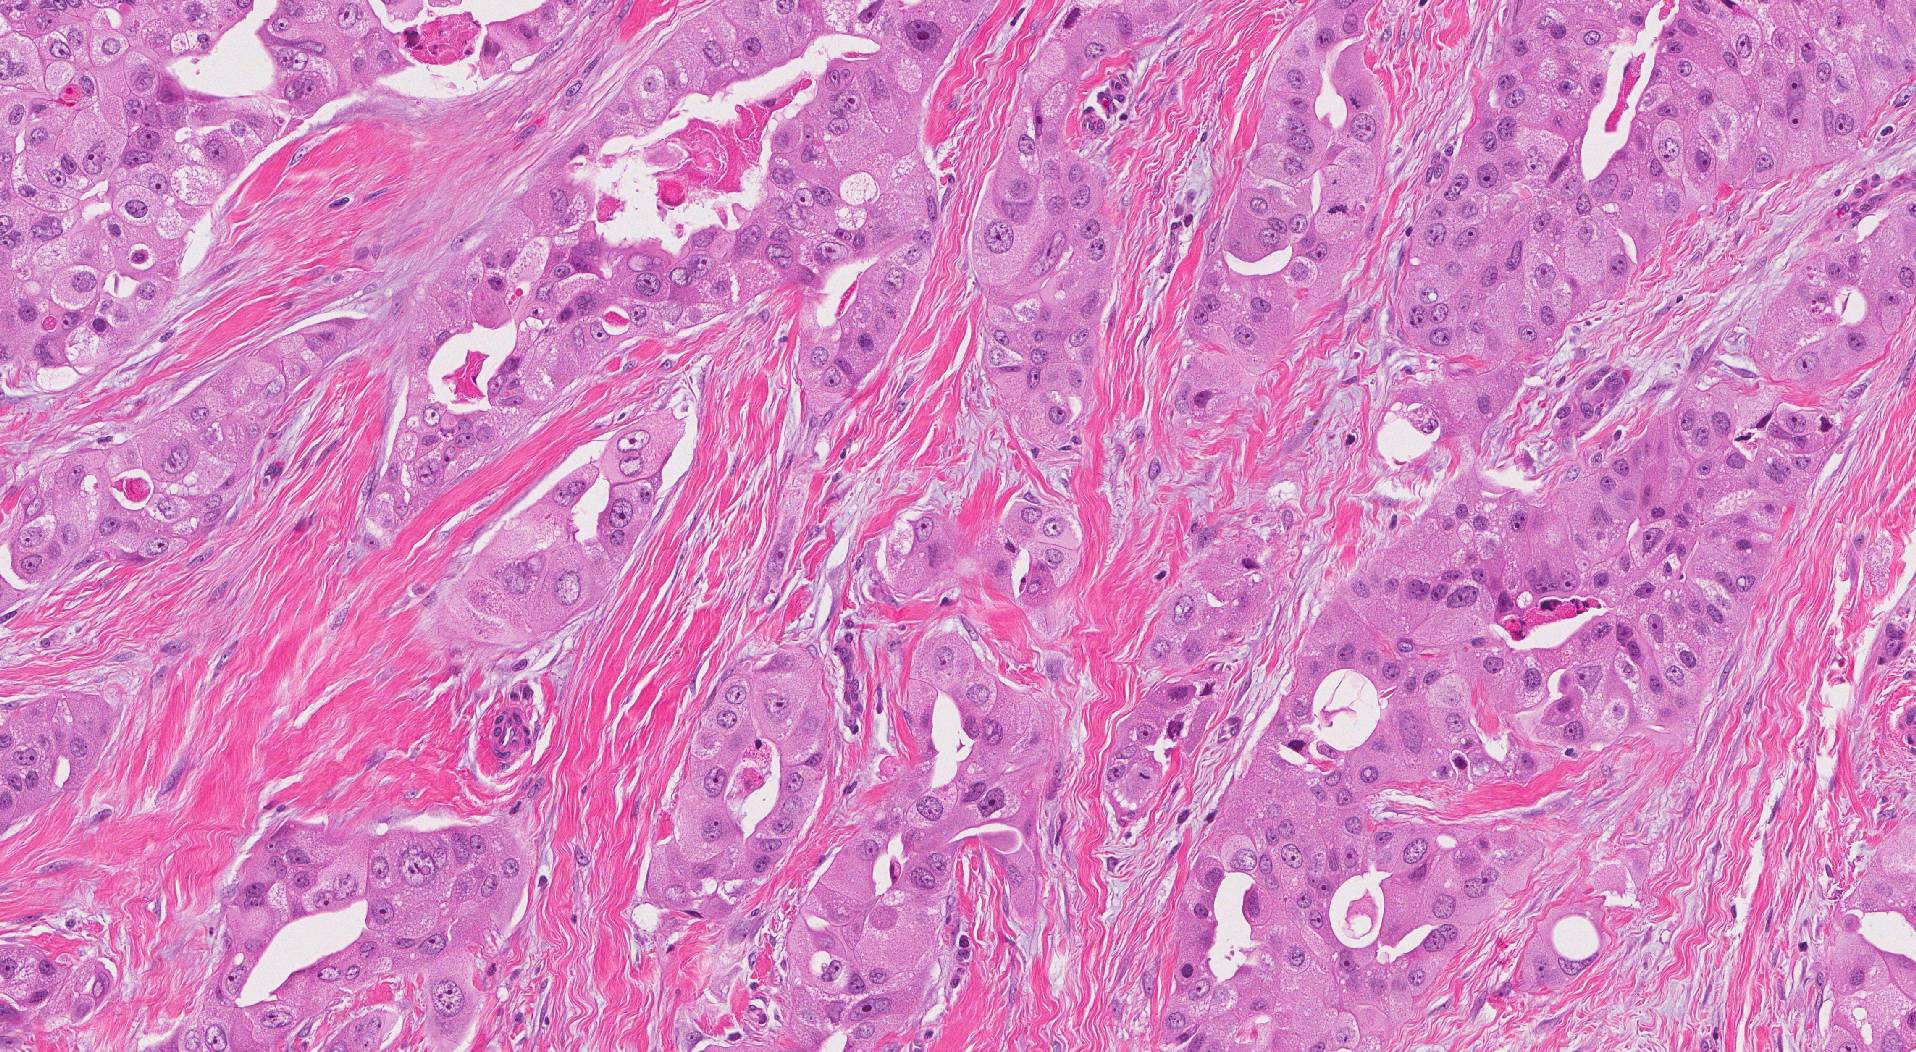 Invasive ductal carcinoma with apocrine features